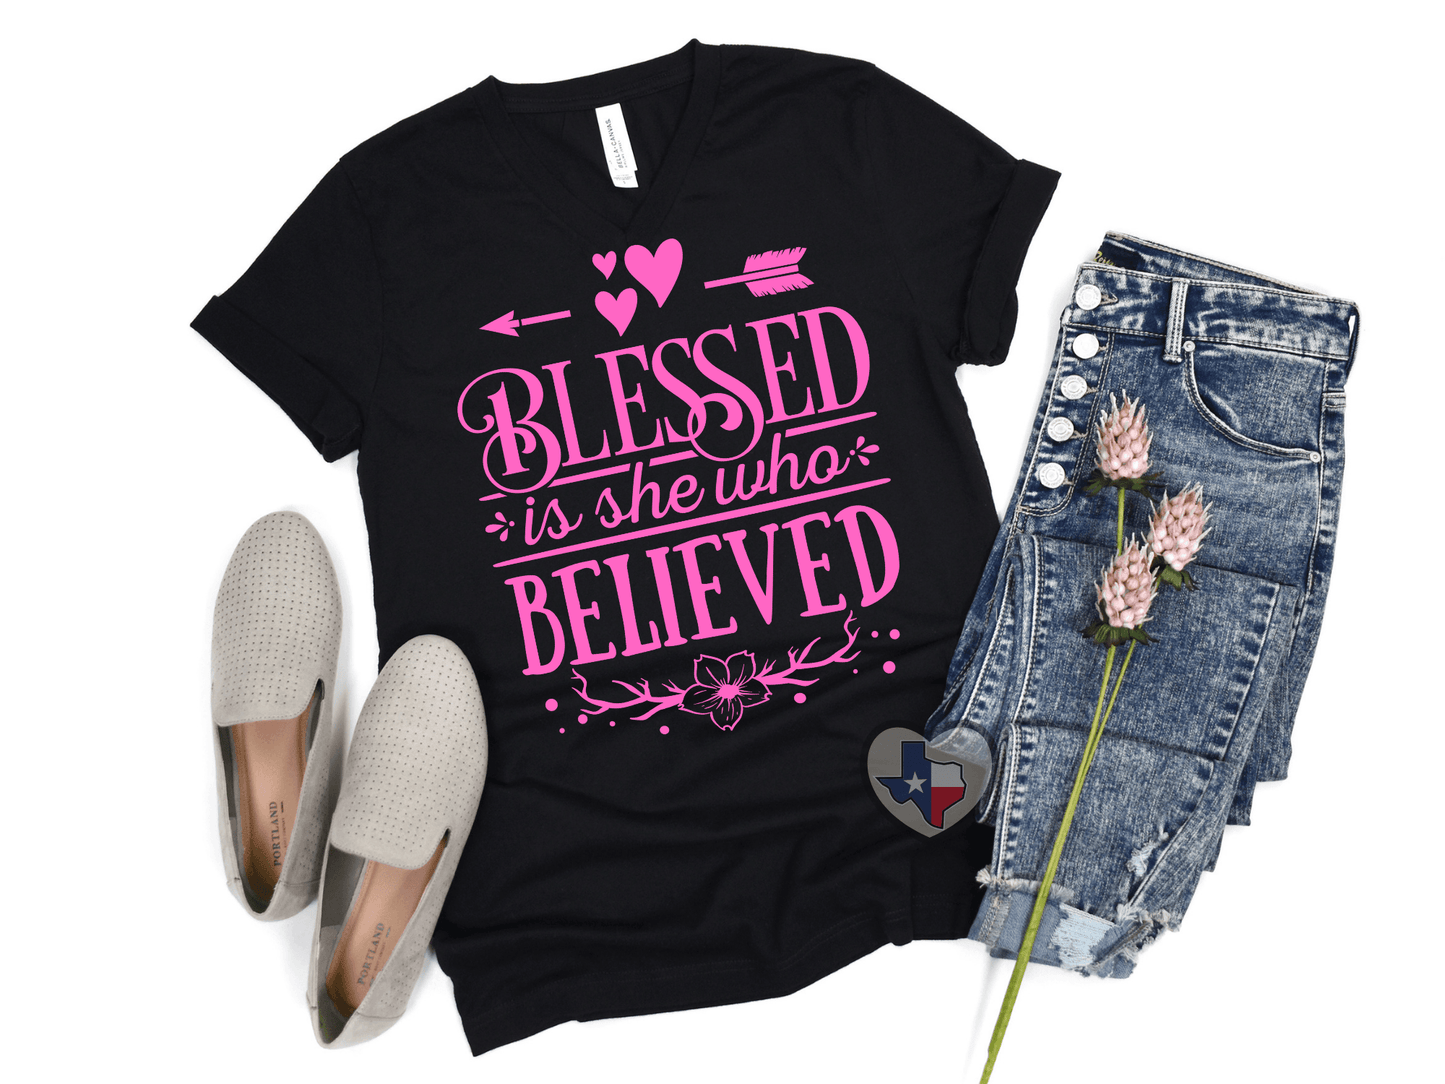 Blessed Is She Who Believed - Texas Transfers and Designs